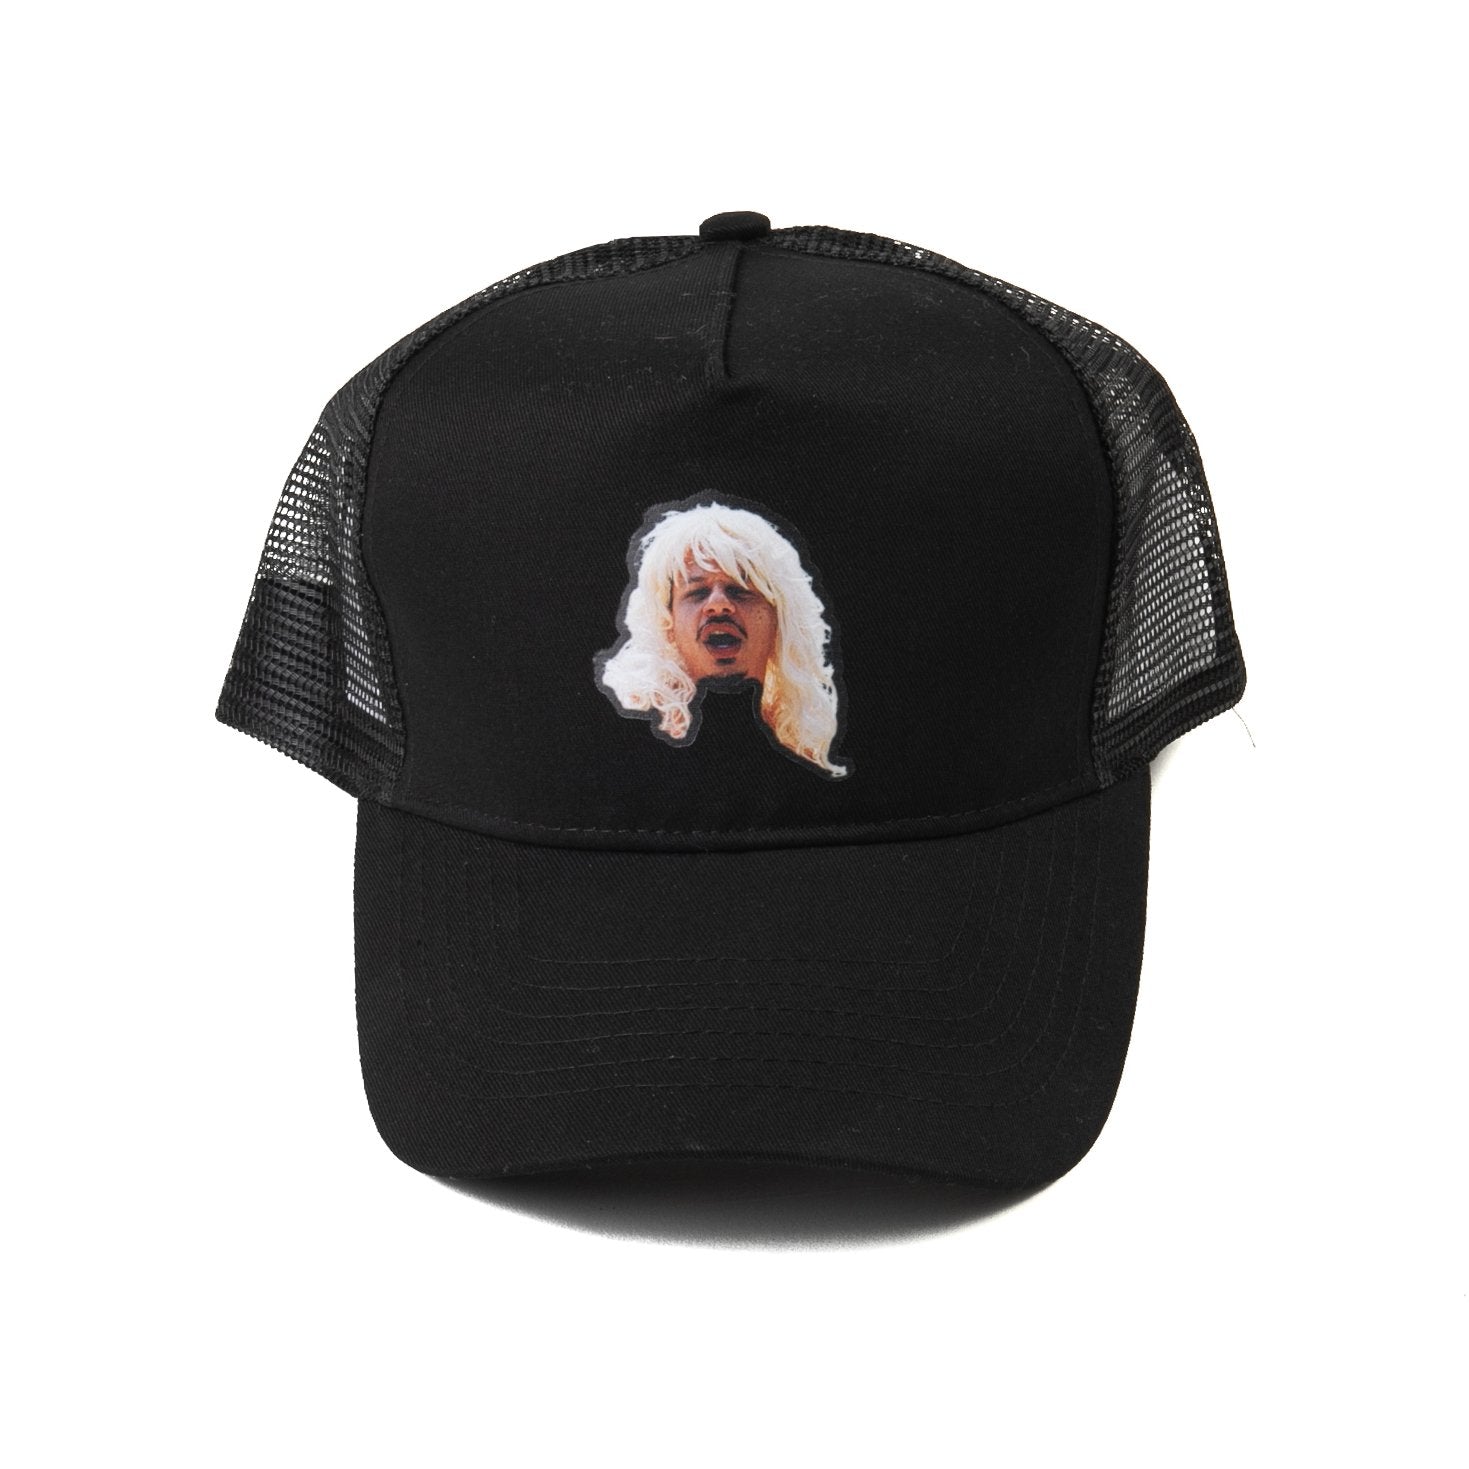 black trucker hat with eric andre image on the front